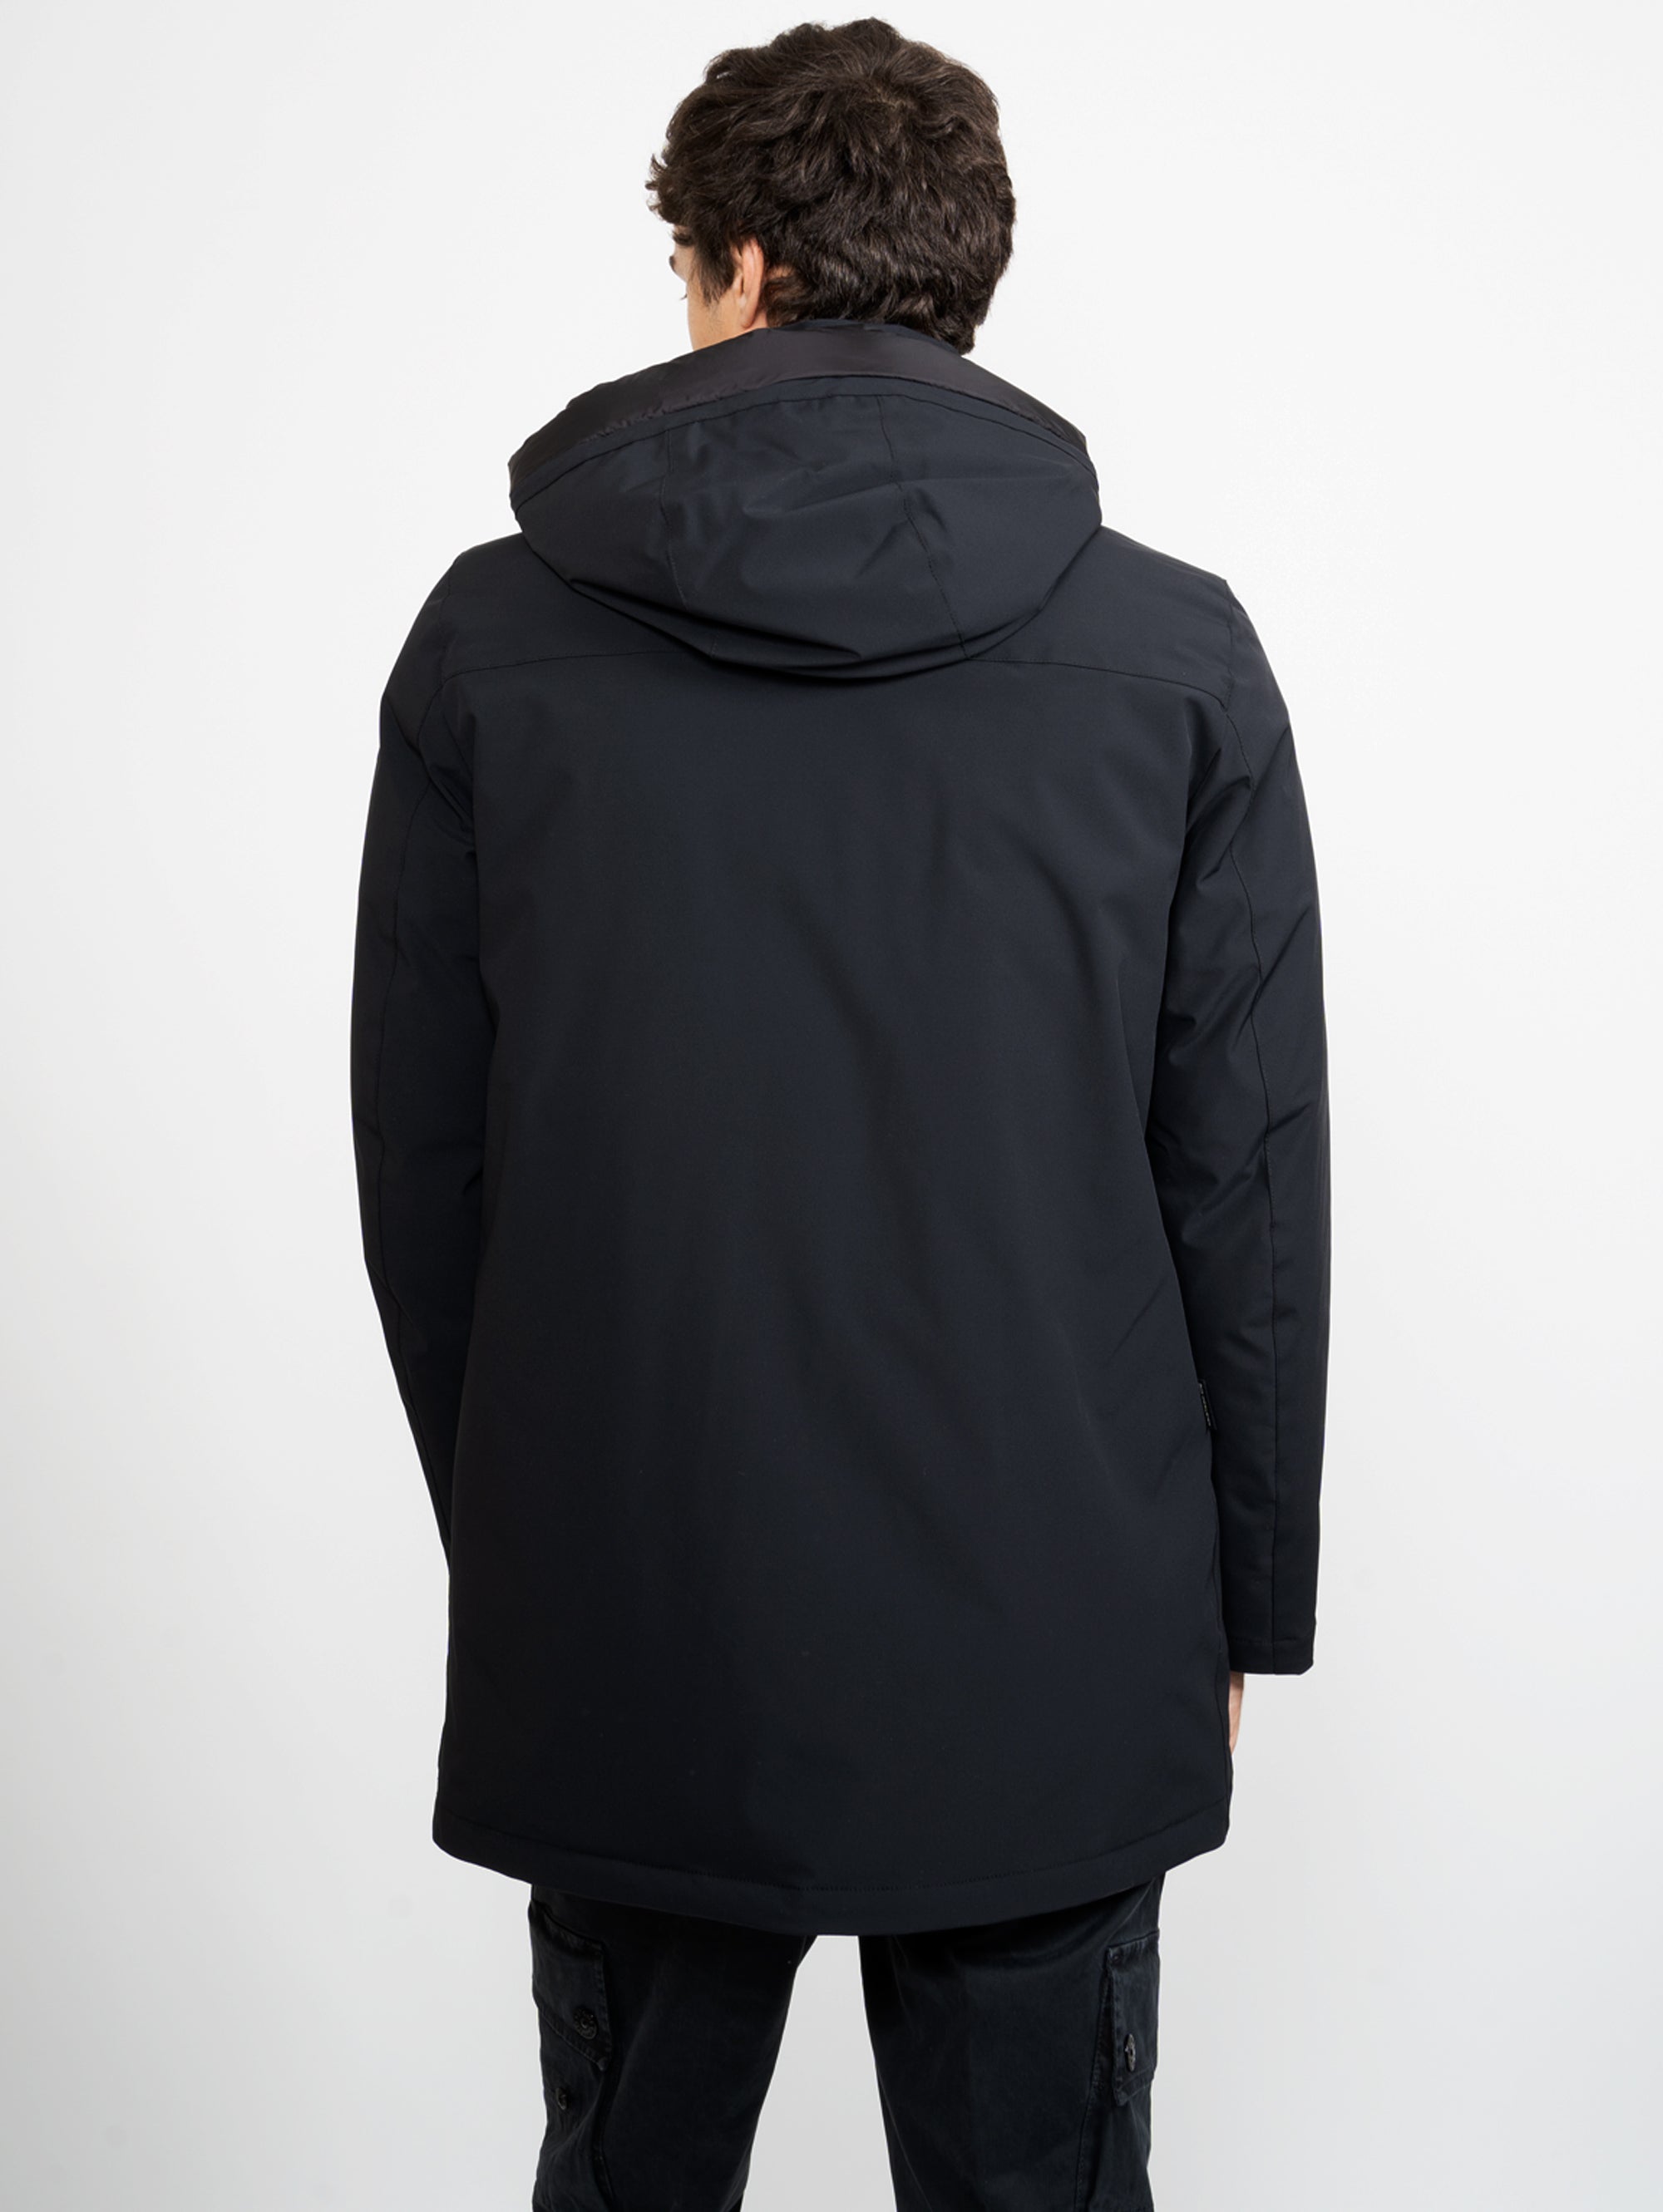 Mountain Parka in Black Stretch Fabric